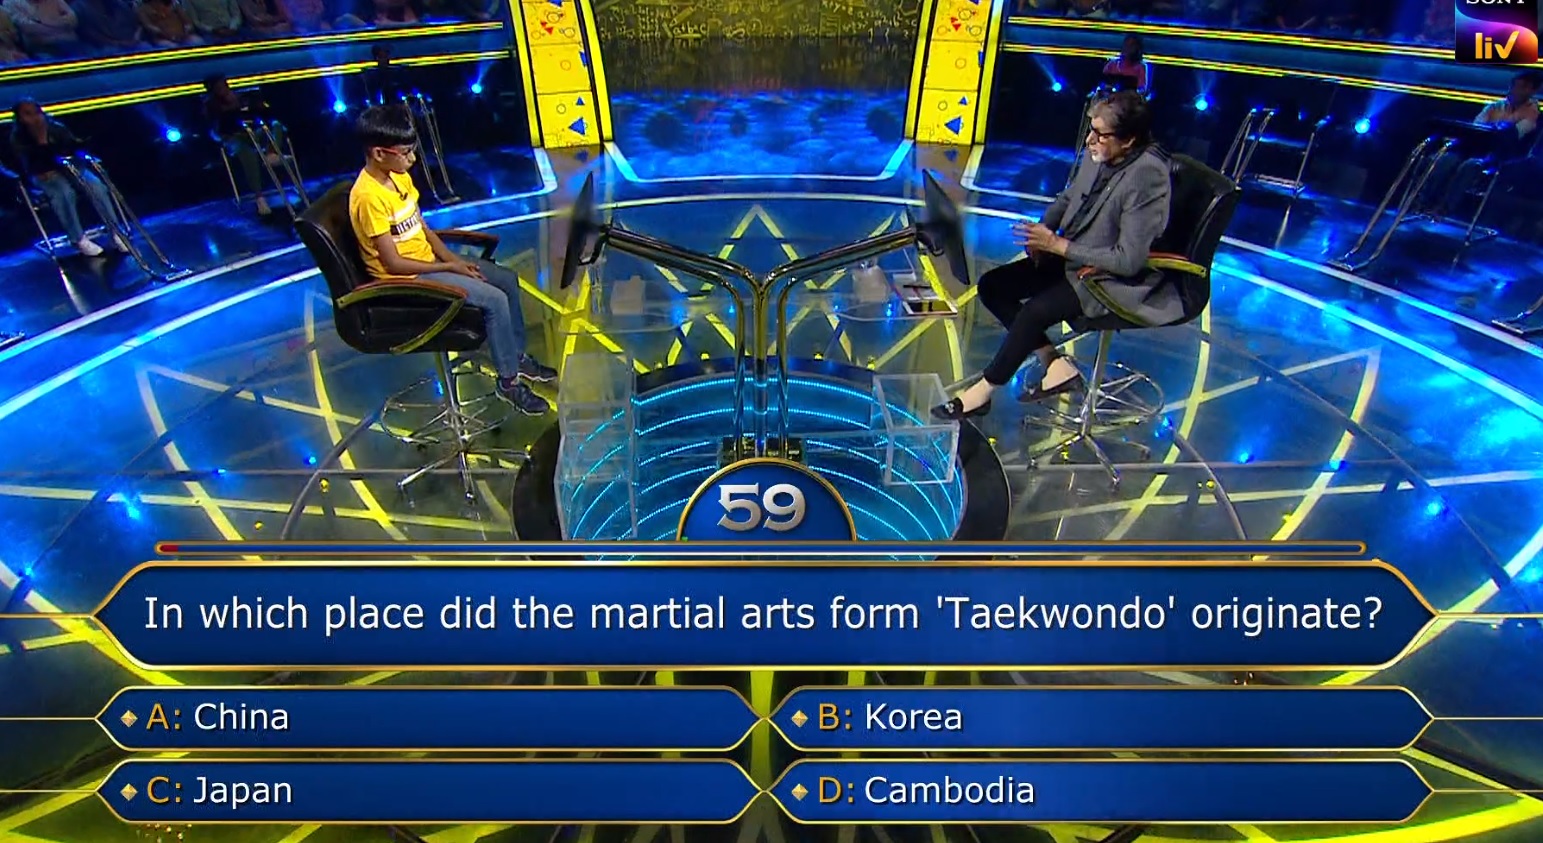 Ques : In which place did the Martial arts form ‘Taekwondo’ originate?